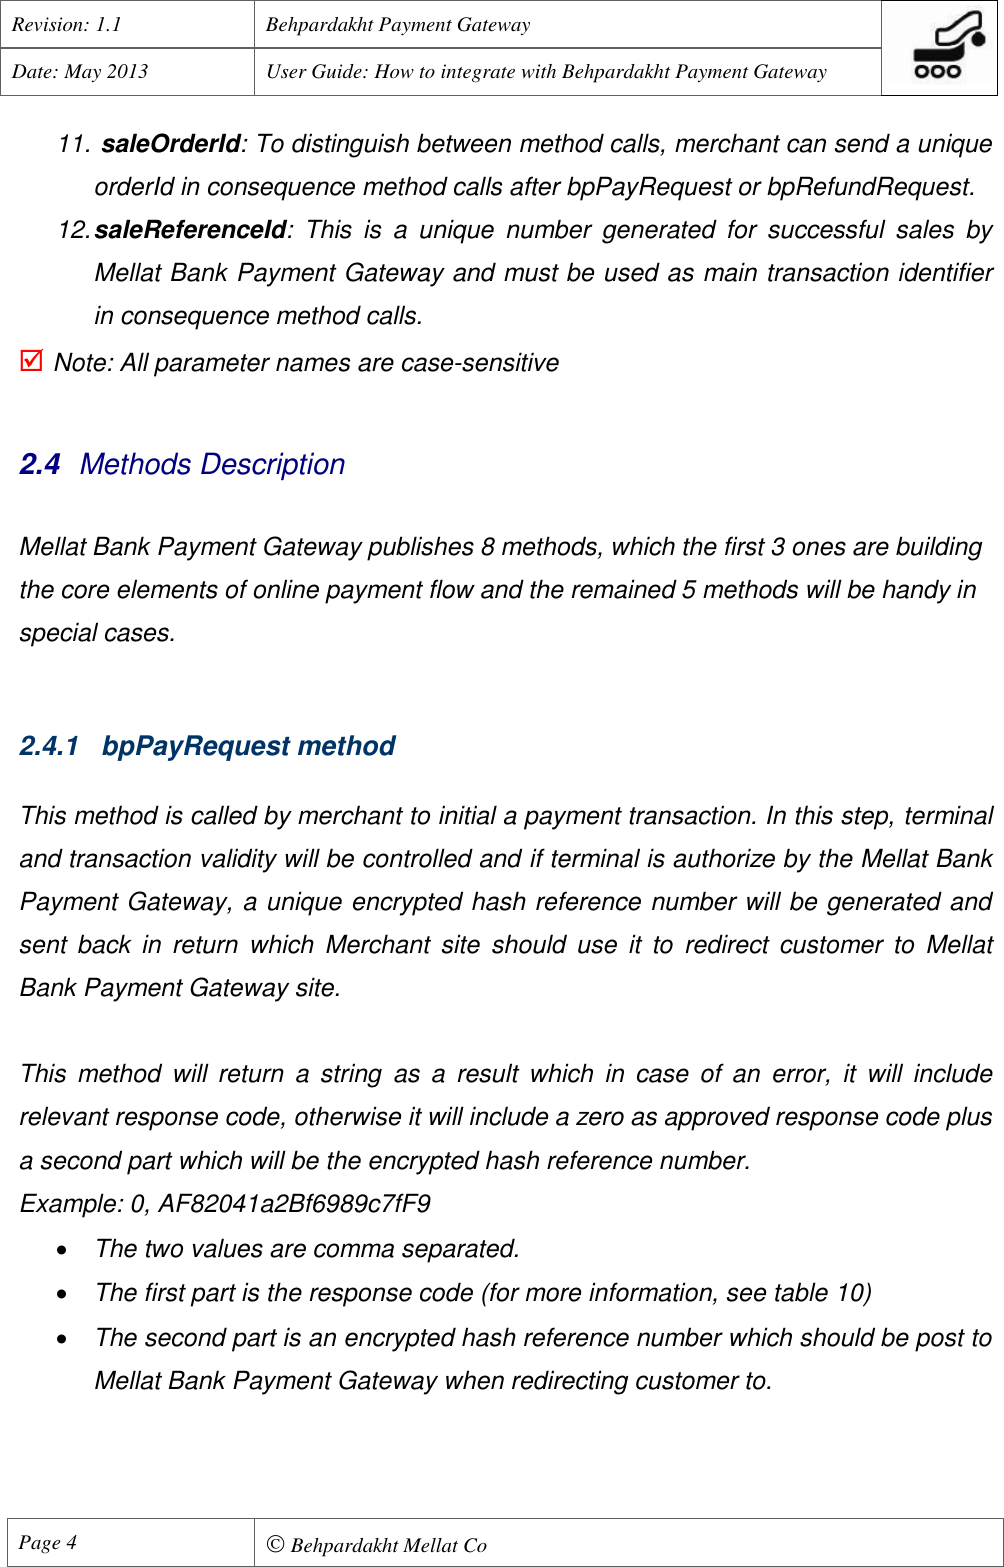 Page 5 of 11 - Behpardakht Mellat - Payment Gateway PGW User Manual English Ver 1.1